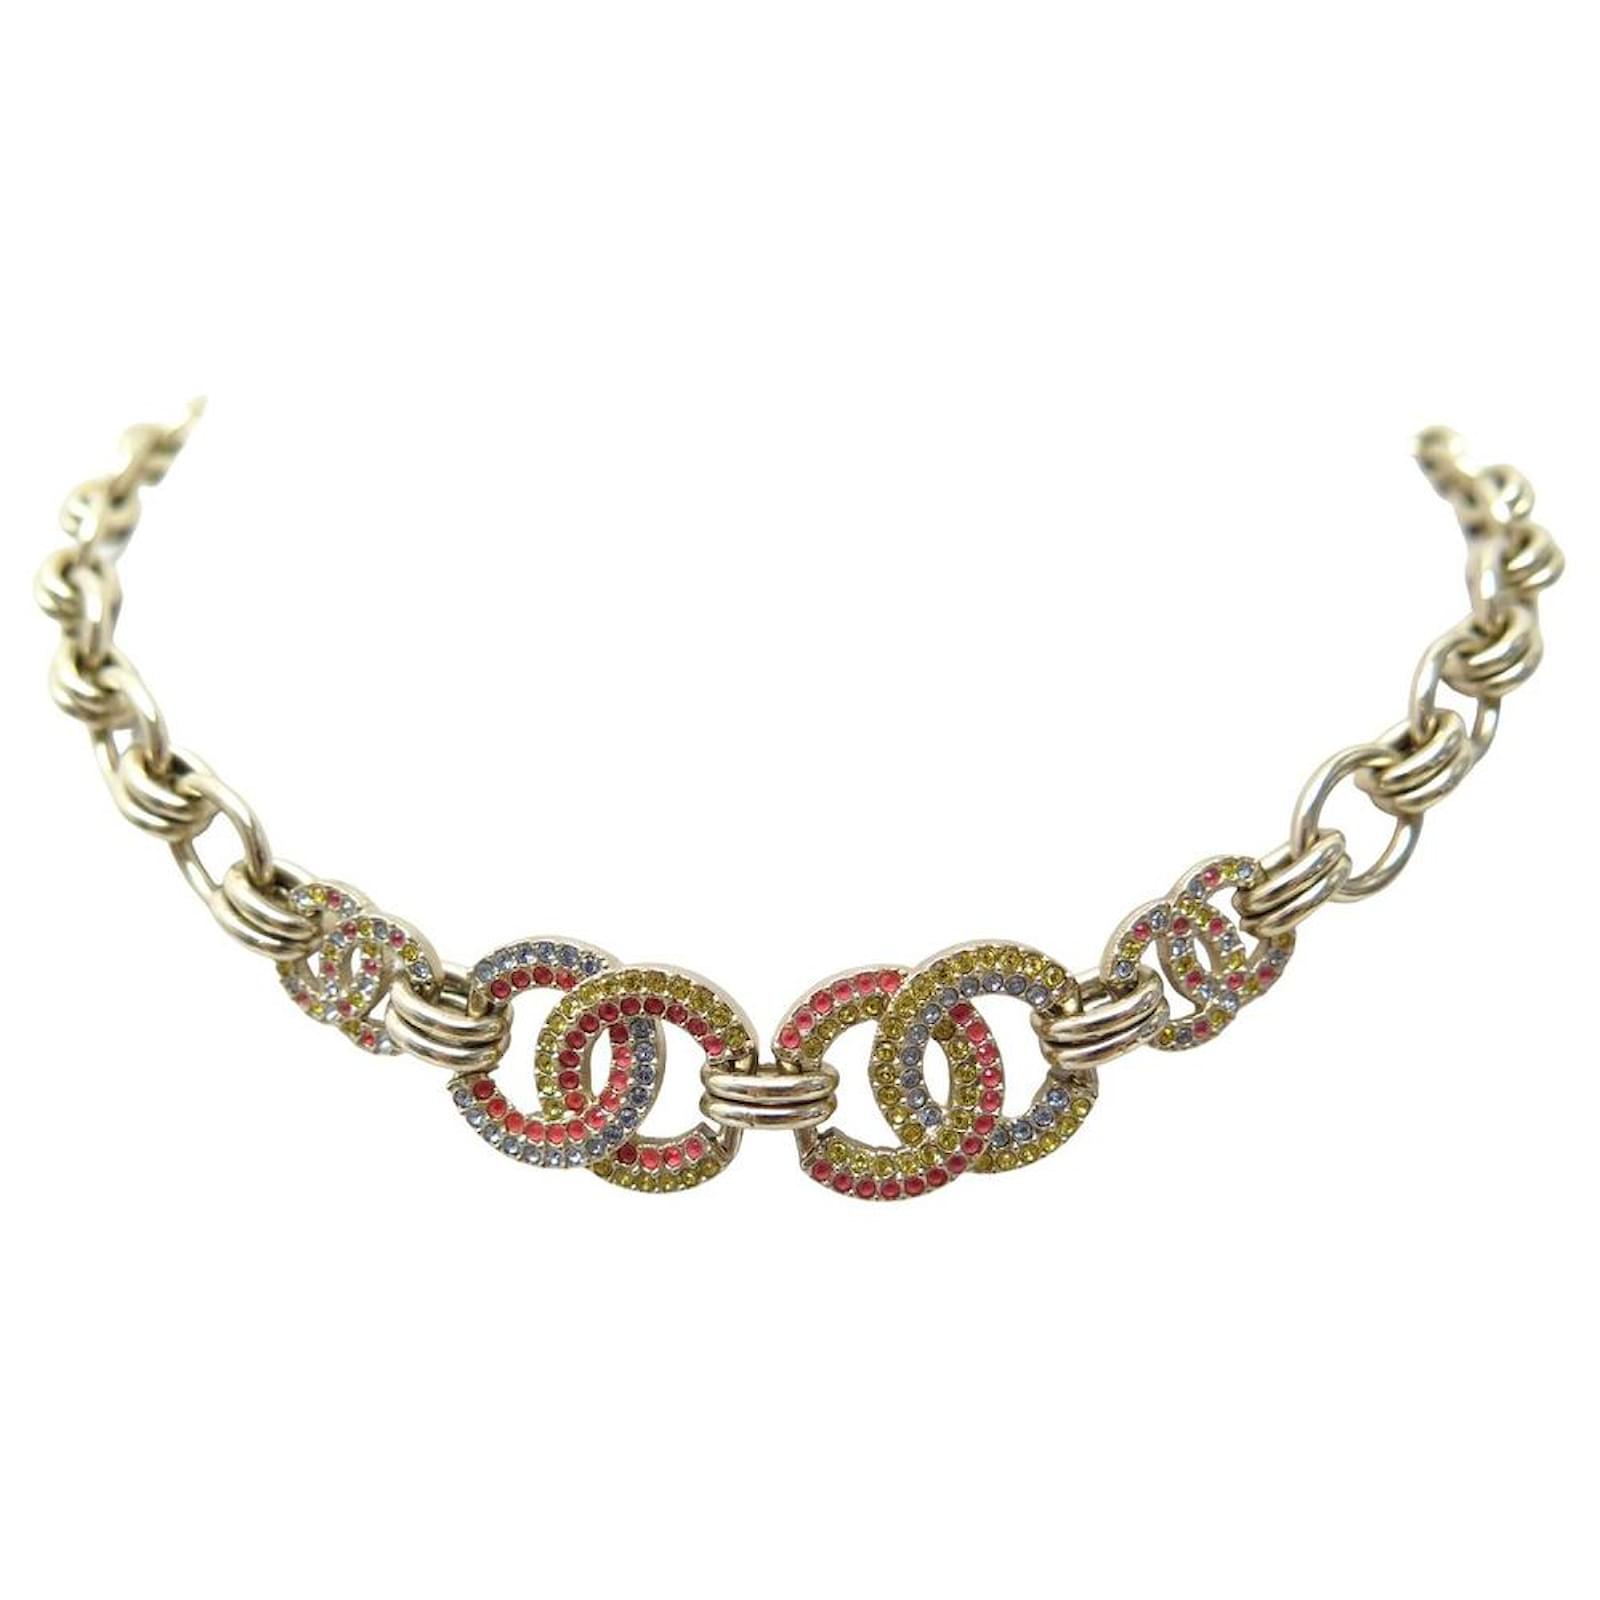 NEW CHANEL CHOKER NECKLACE LOGO CC MULTICOLORED 2022 IN GOLD METAL